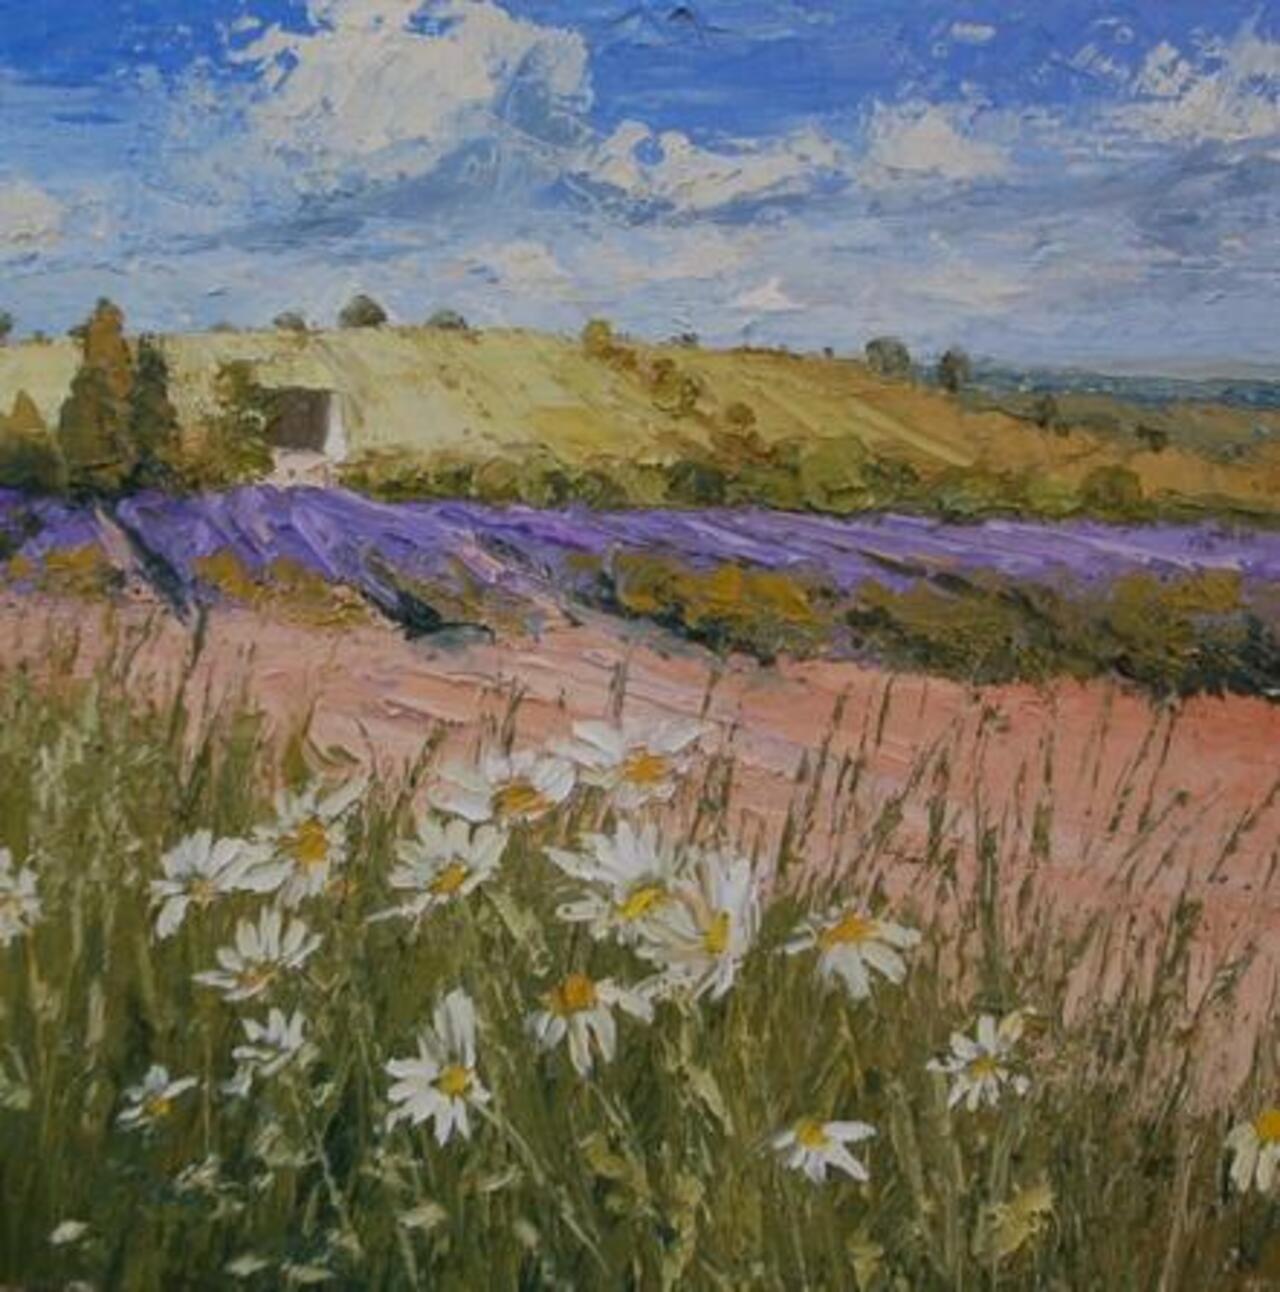 Into Summer, oil on canvas. #painting. #art. #landscape. #wildflowers. #lavender. #skies. http://t.co/TIEhXSjqM9